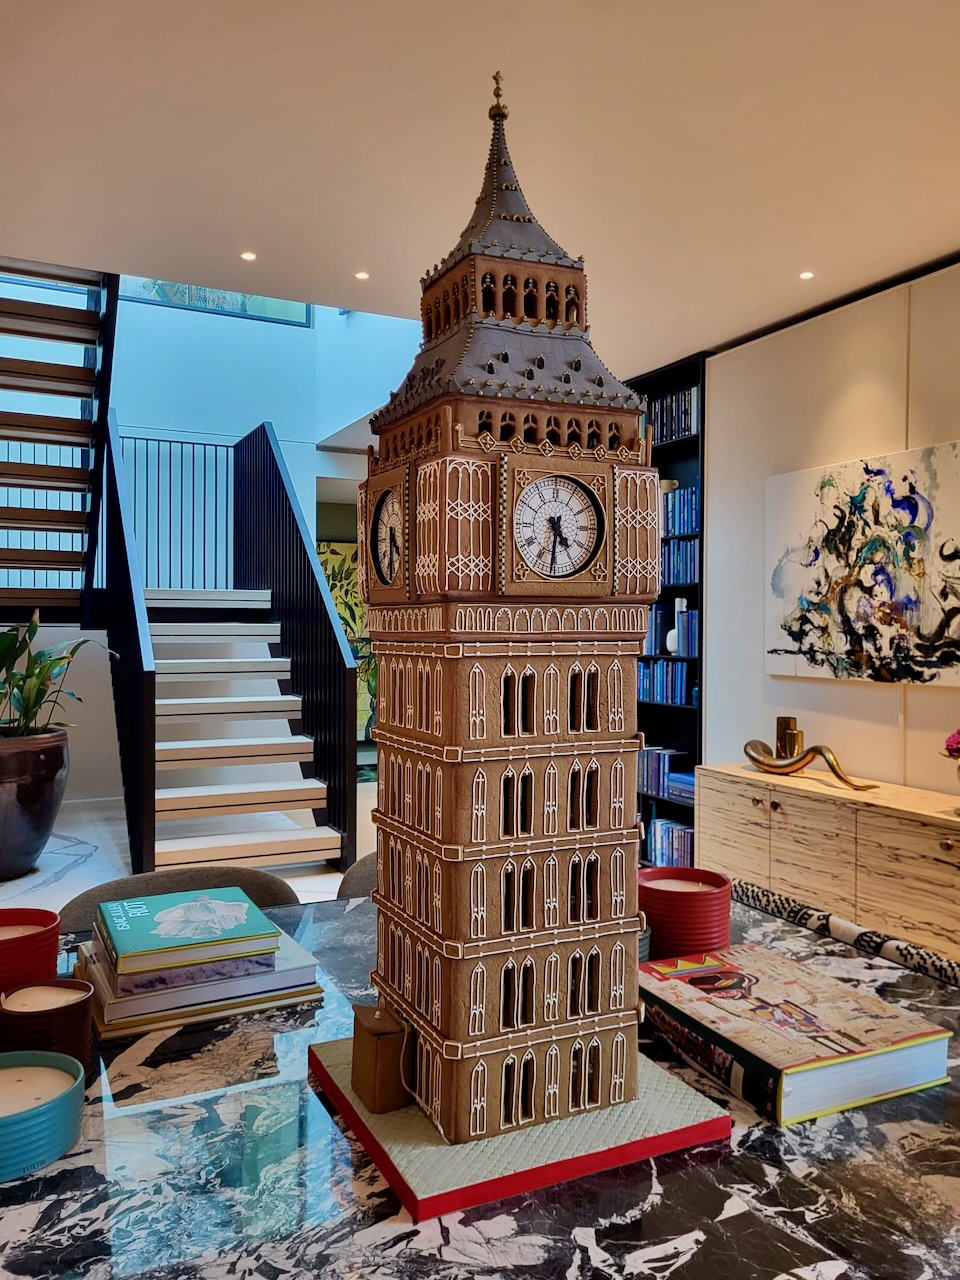 A gingerbread Big Ben made entirely from gingerbread and standing at 4ft 6" tall